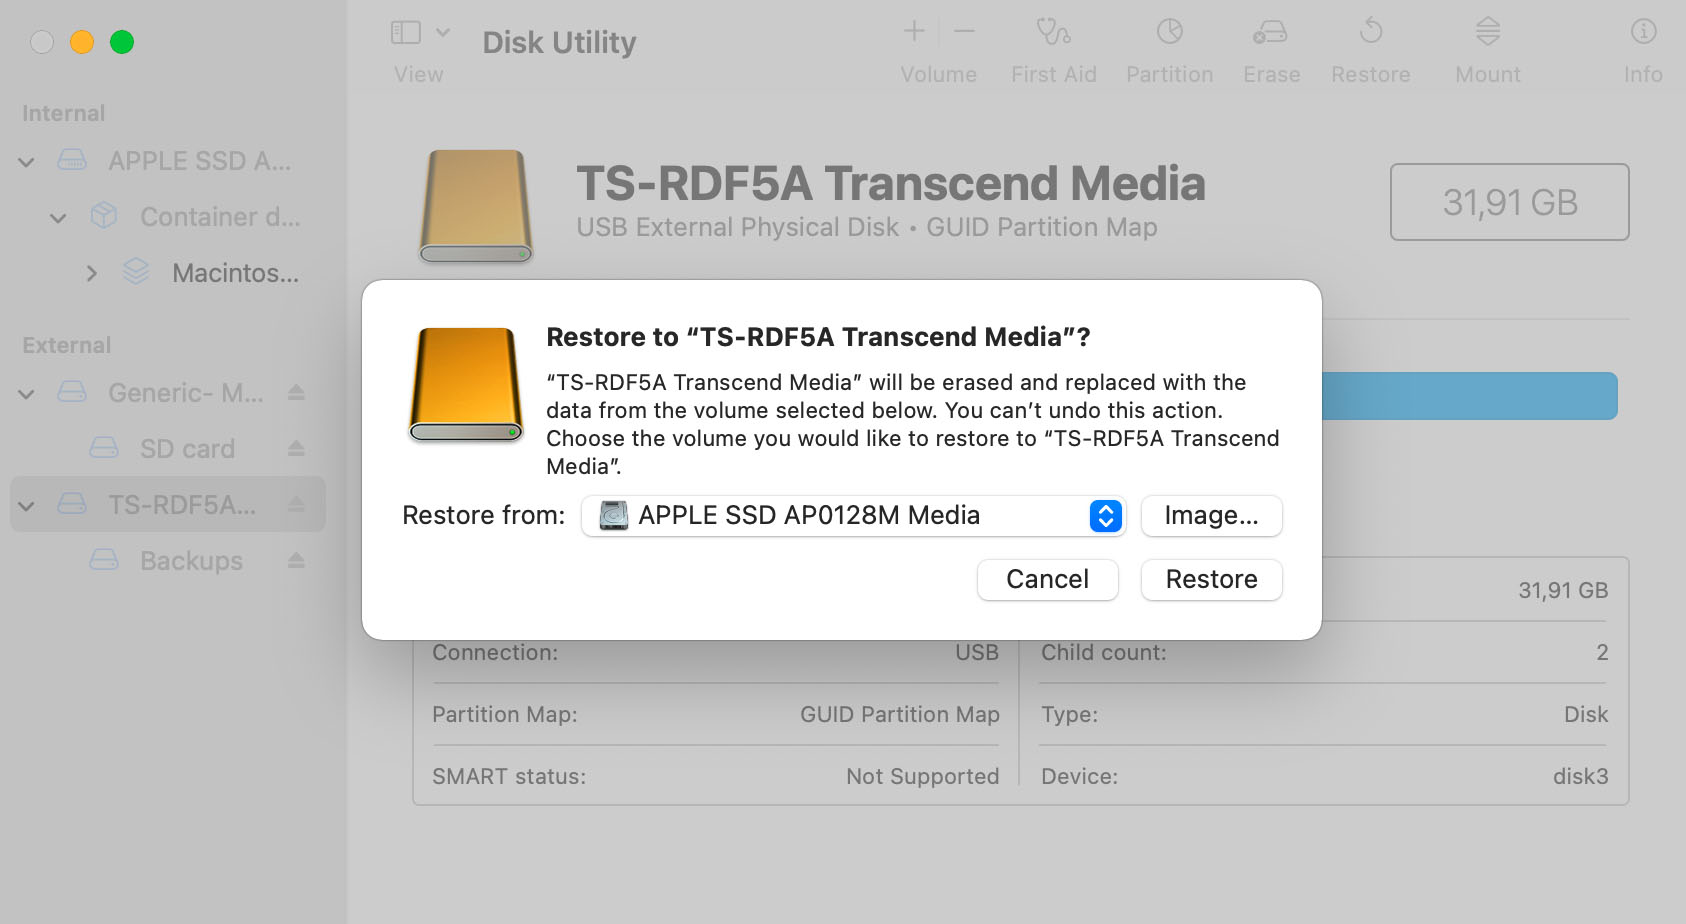 Restore a Disk Using Disk Utility on Your Mac